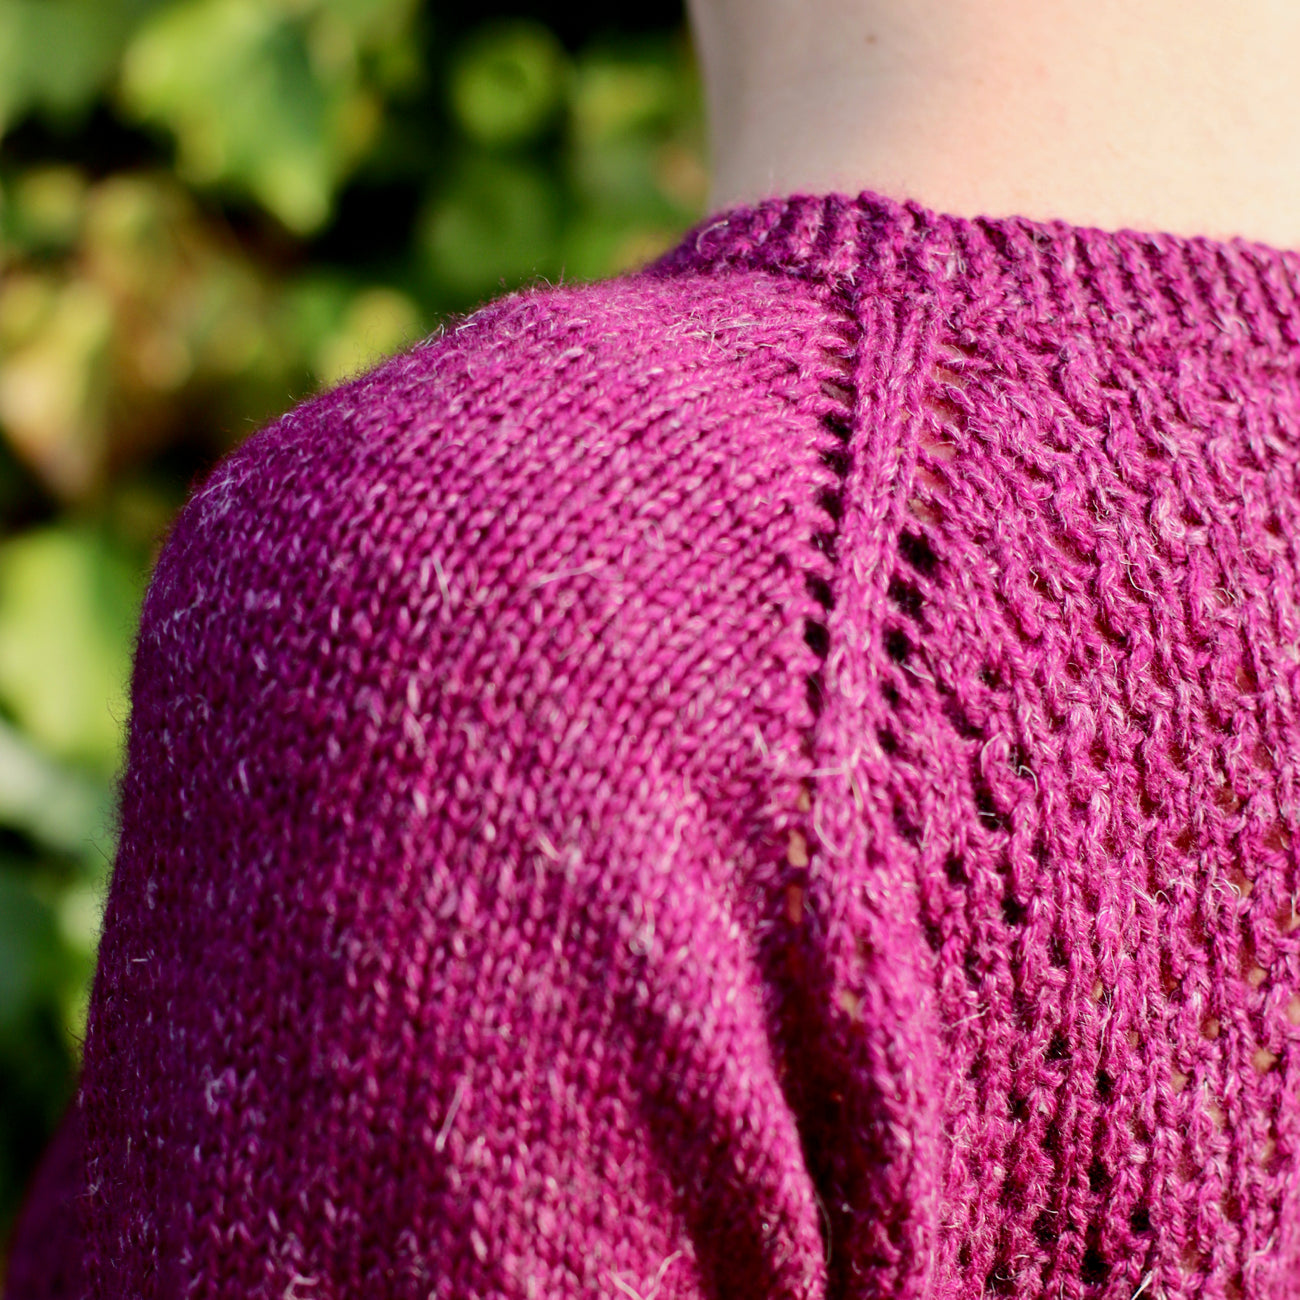 Learn to Knit: Yarnover Tutorial